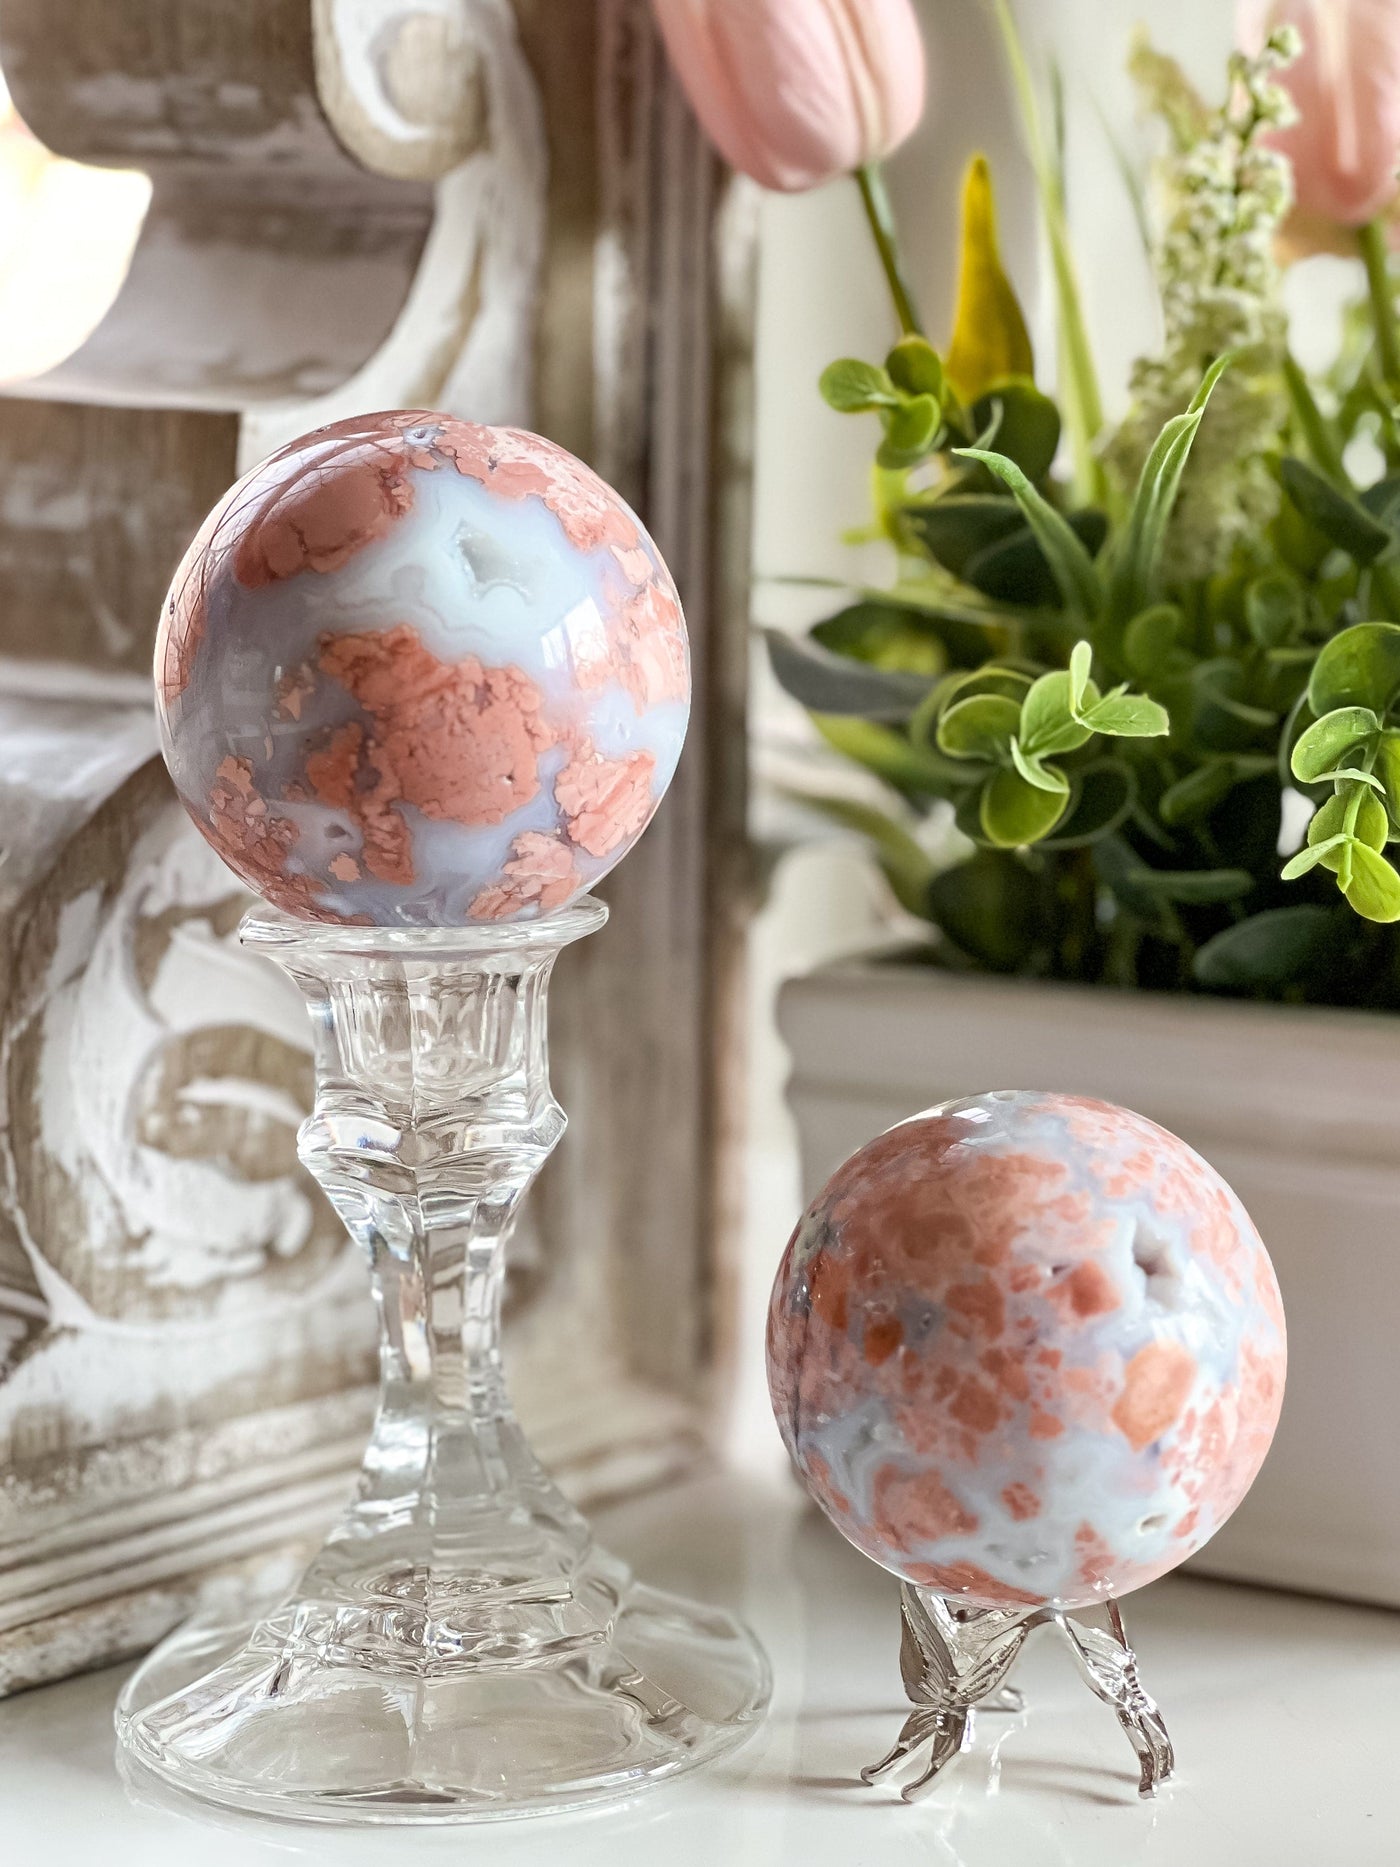 COTTON CANDY PINK AGATE DRUZY SPHERE Revive In Style Vintage Furniture Painted Refinished Redesign Beautiful One of a Kind Artistic Antique Unique Home Decor Interior Design French Country Shabby Chic Cottage Farmhouse Grandmillenial Coastal Chalk Paint Metallic Glam Eclectic Quality Dovetailed Rustic Furniture Painter Pinterest Bedroom Living Room Entryway Kitchen Home Trends House Styles Decorating ideas